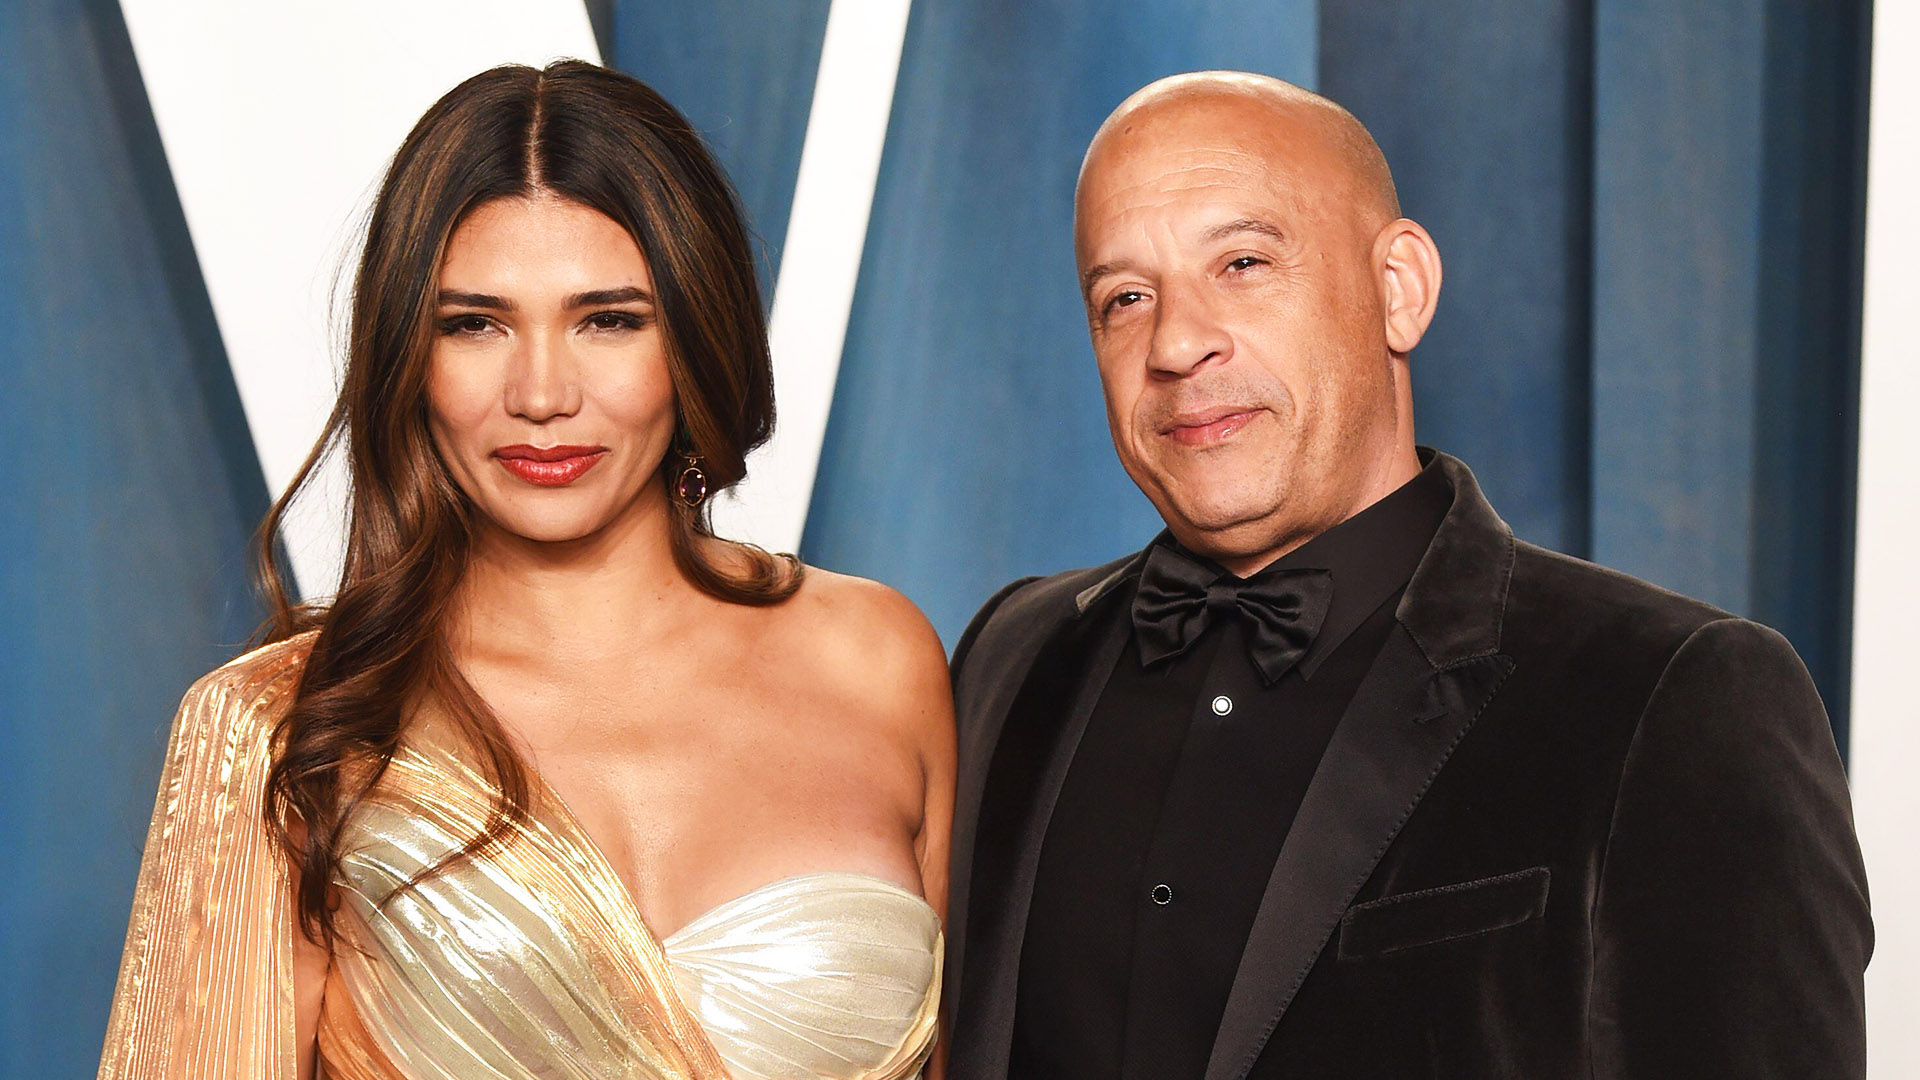 Vin Diesel's Wife is a Self-Made Millionaire; Here's How Much She's Worth